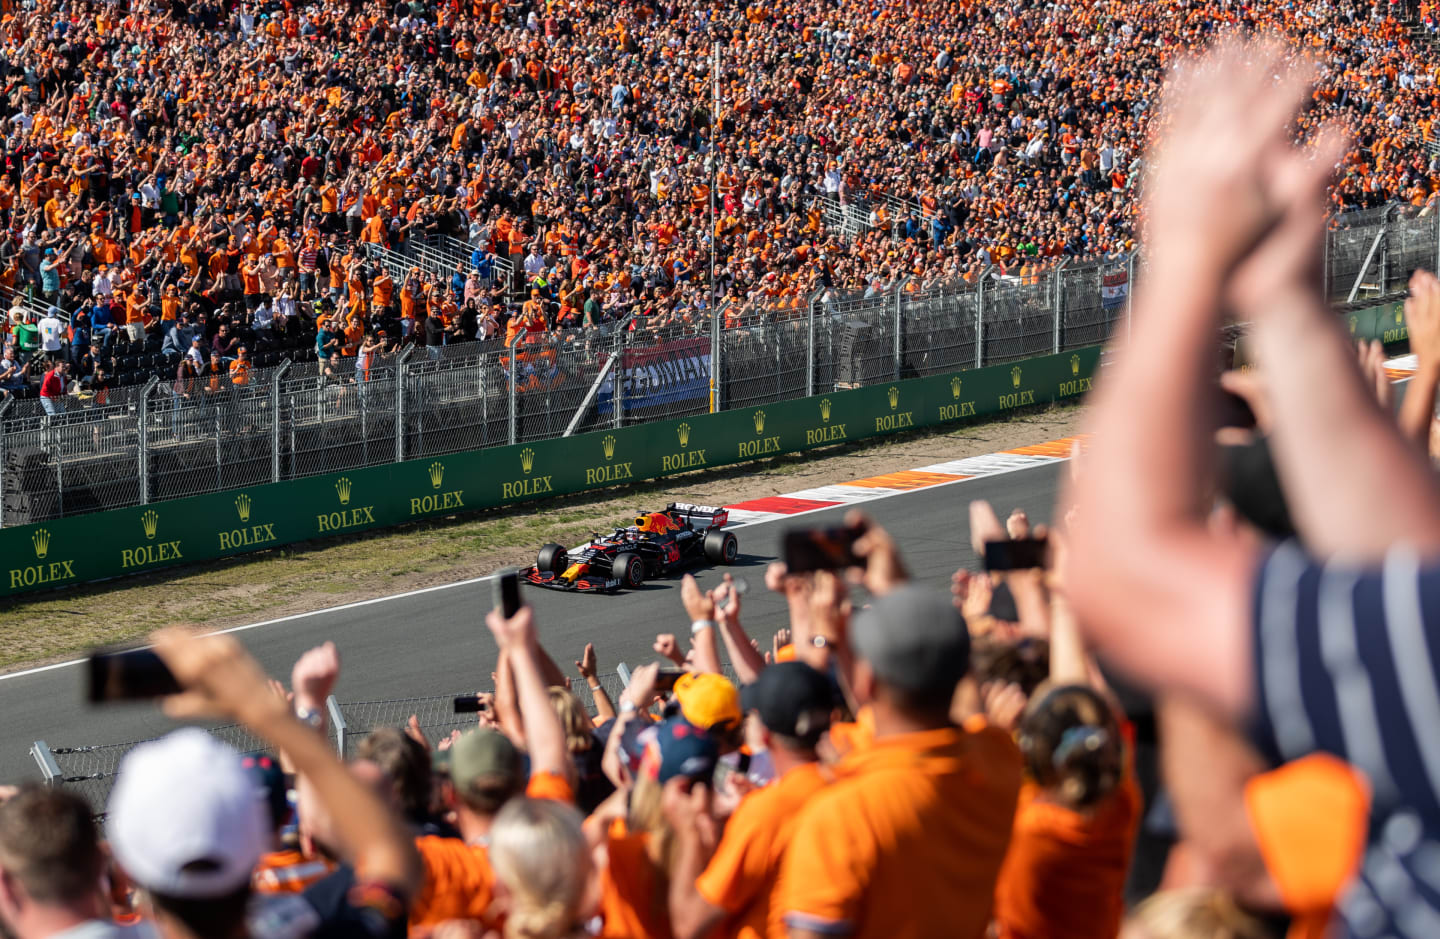 ZANDVOORT, NETHERLANDS - SEPTEMBER 04: Fans celebrate Max Verstappen of the Netherlands driving the (33) Red Bull Racing RB16B Honda during qualifying ahead of the F1 Grand Prix of The Netherlands at Circuit Zandvoort on September 04, 2021 in Zandvoort, Netherlands. (Photo by Boris Streubel/Getty Images)